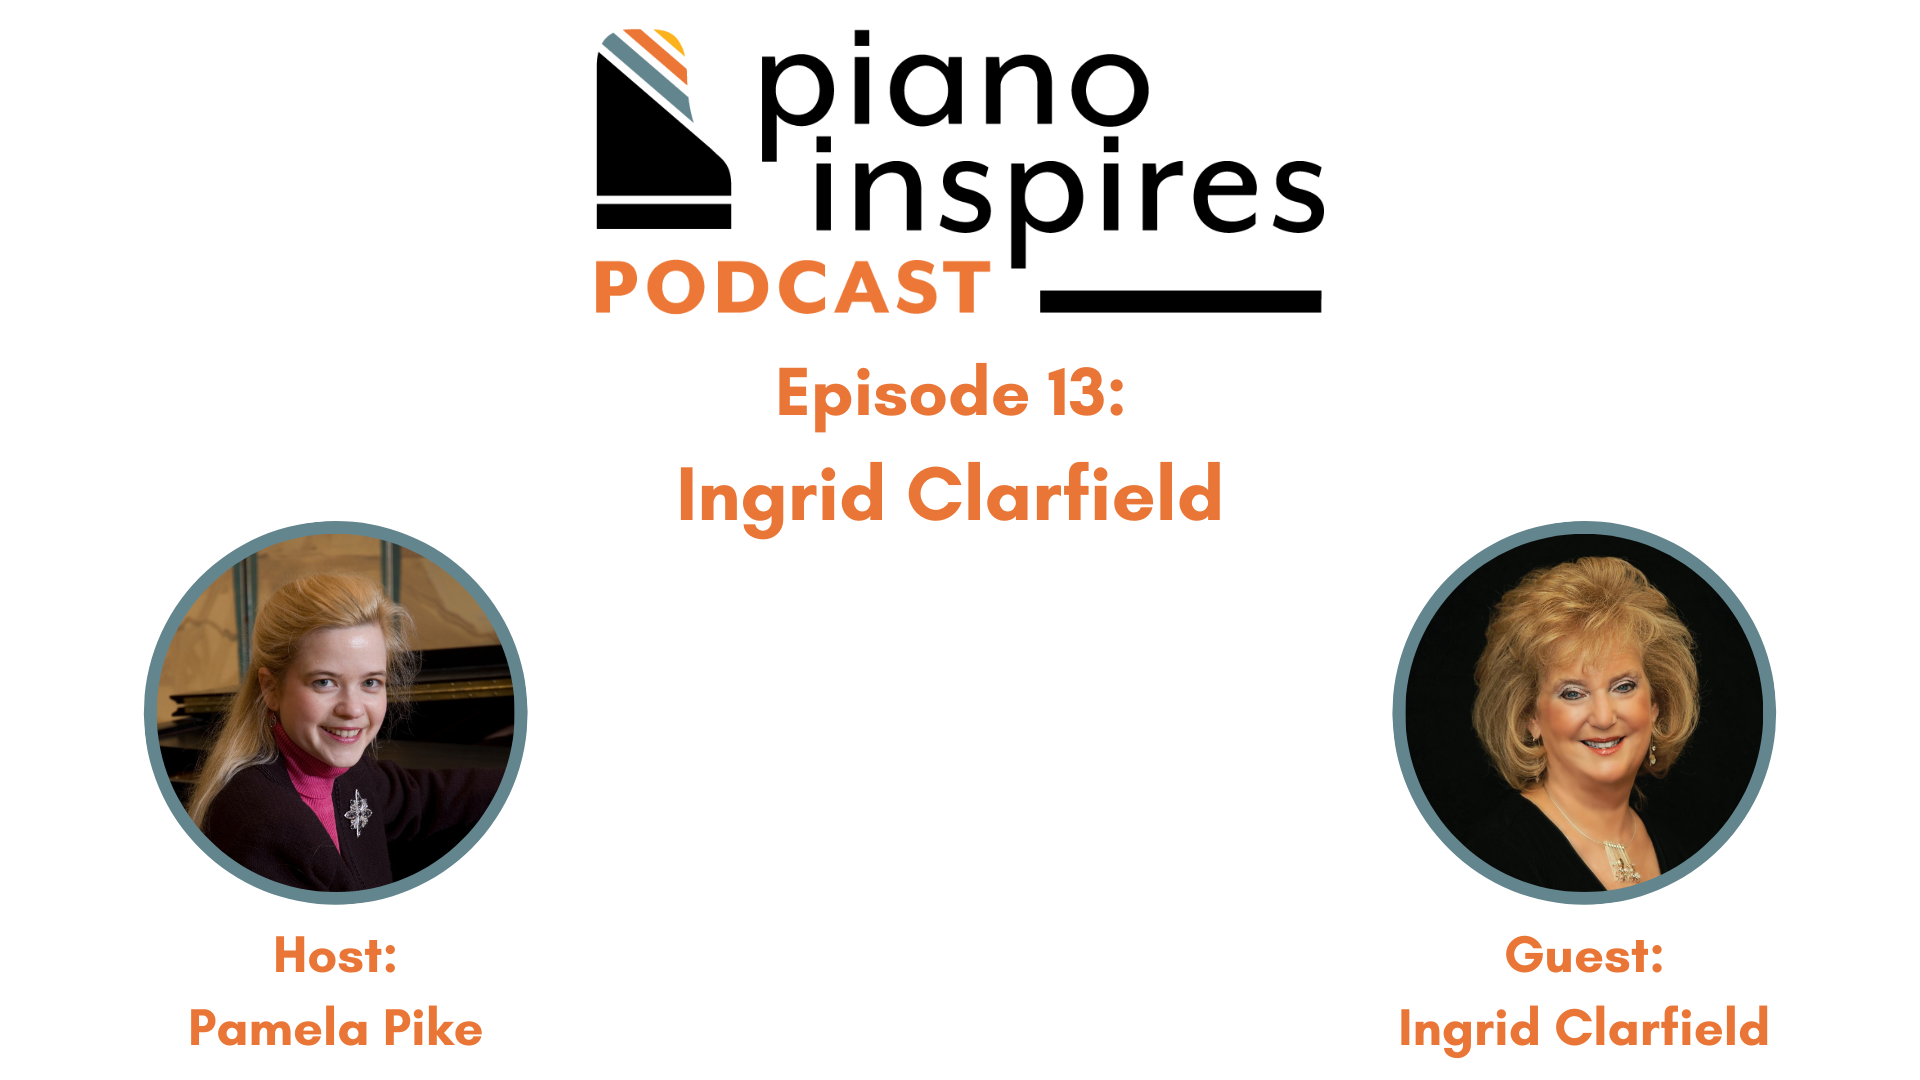 Episode 13: Ingrid Clarfield, Internationally Acclaimed Teacher, Performer, Clinician, and Author